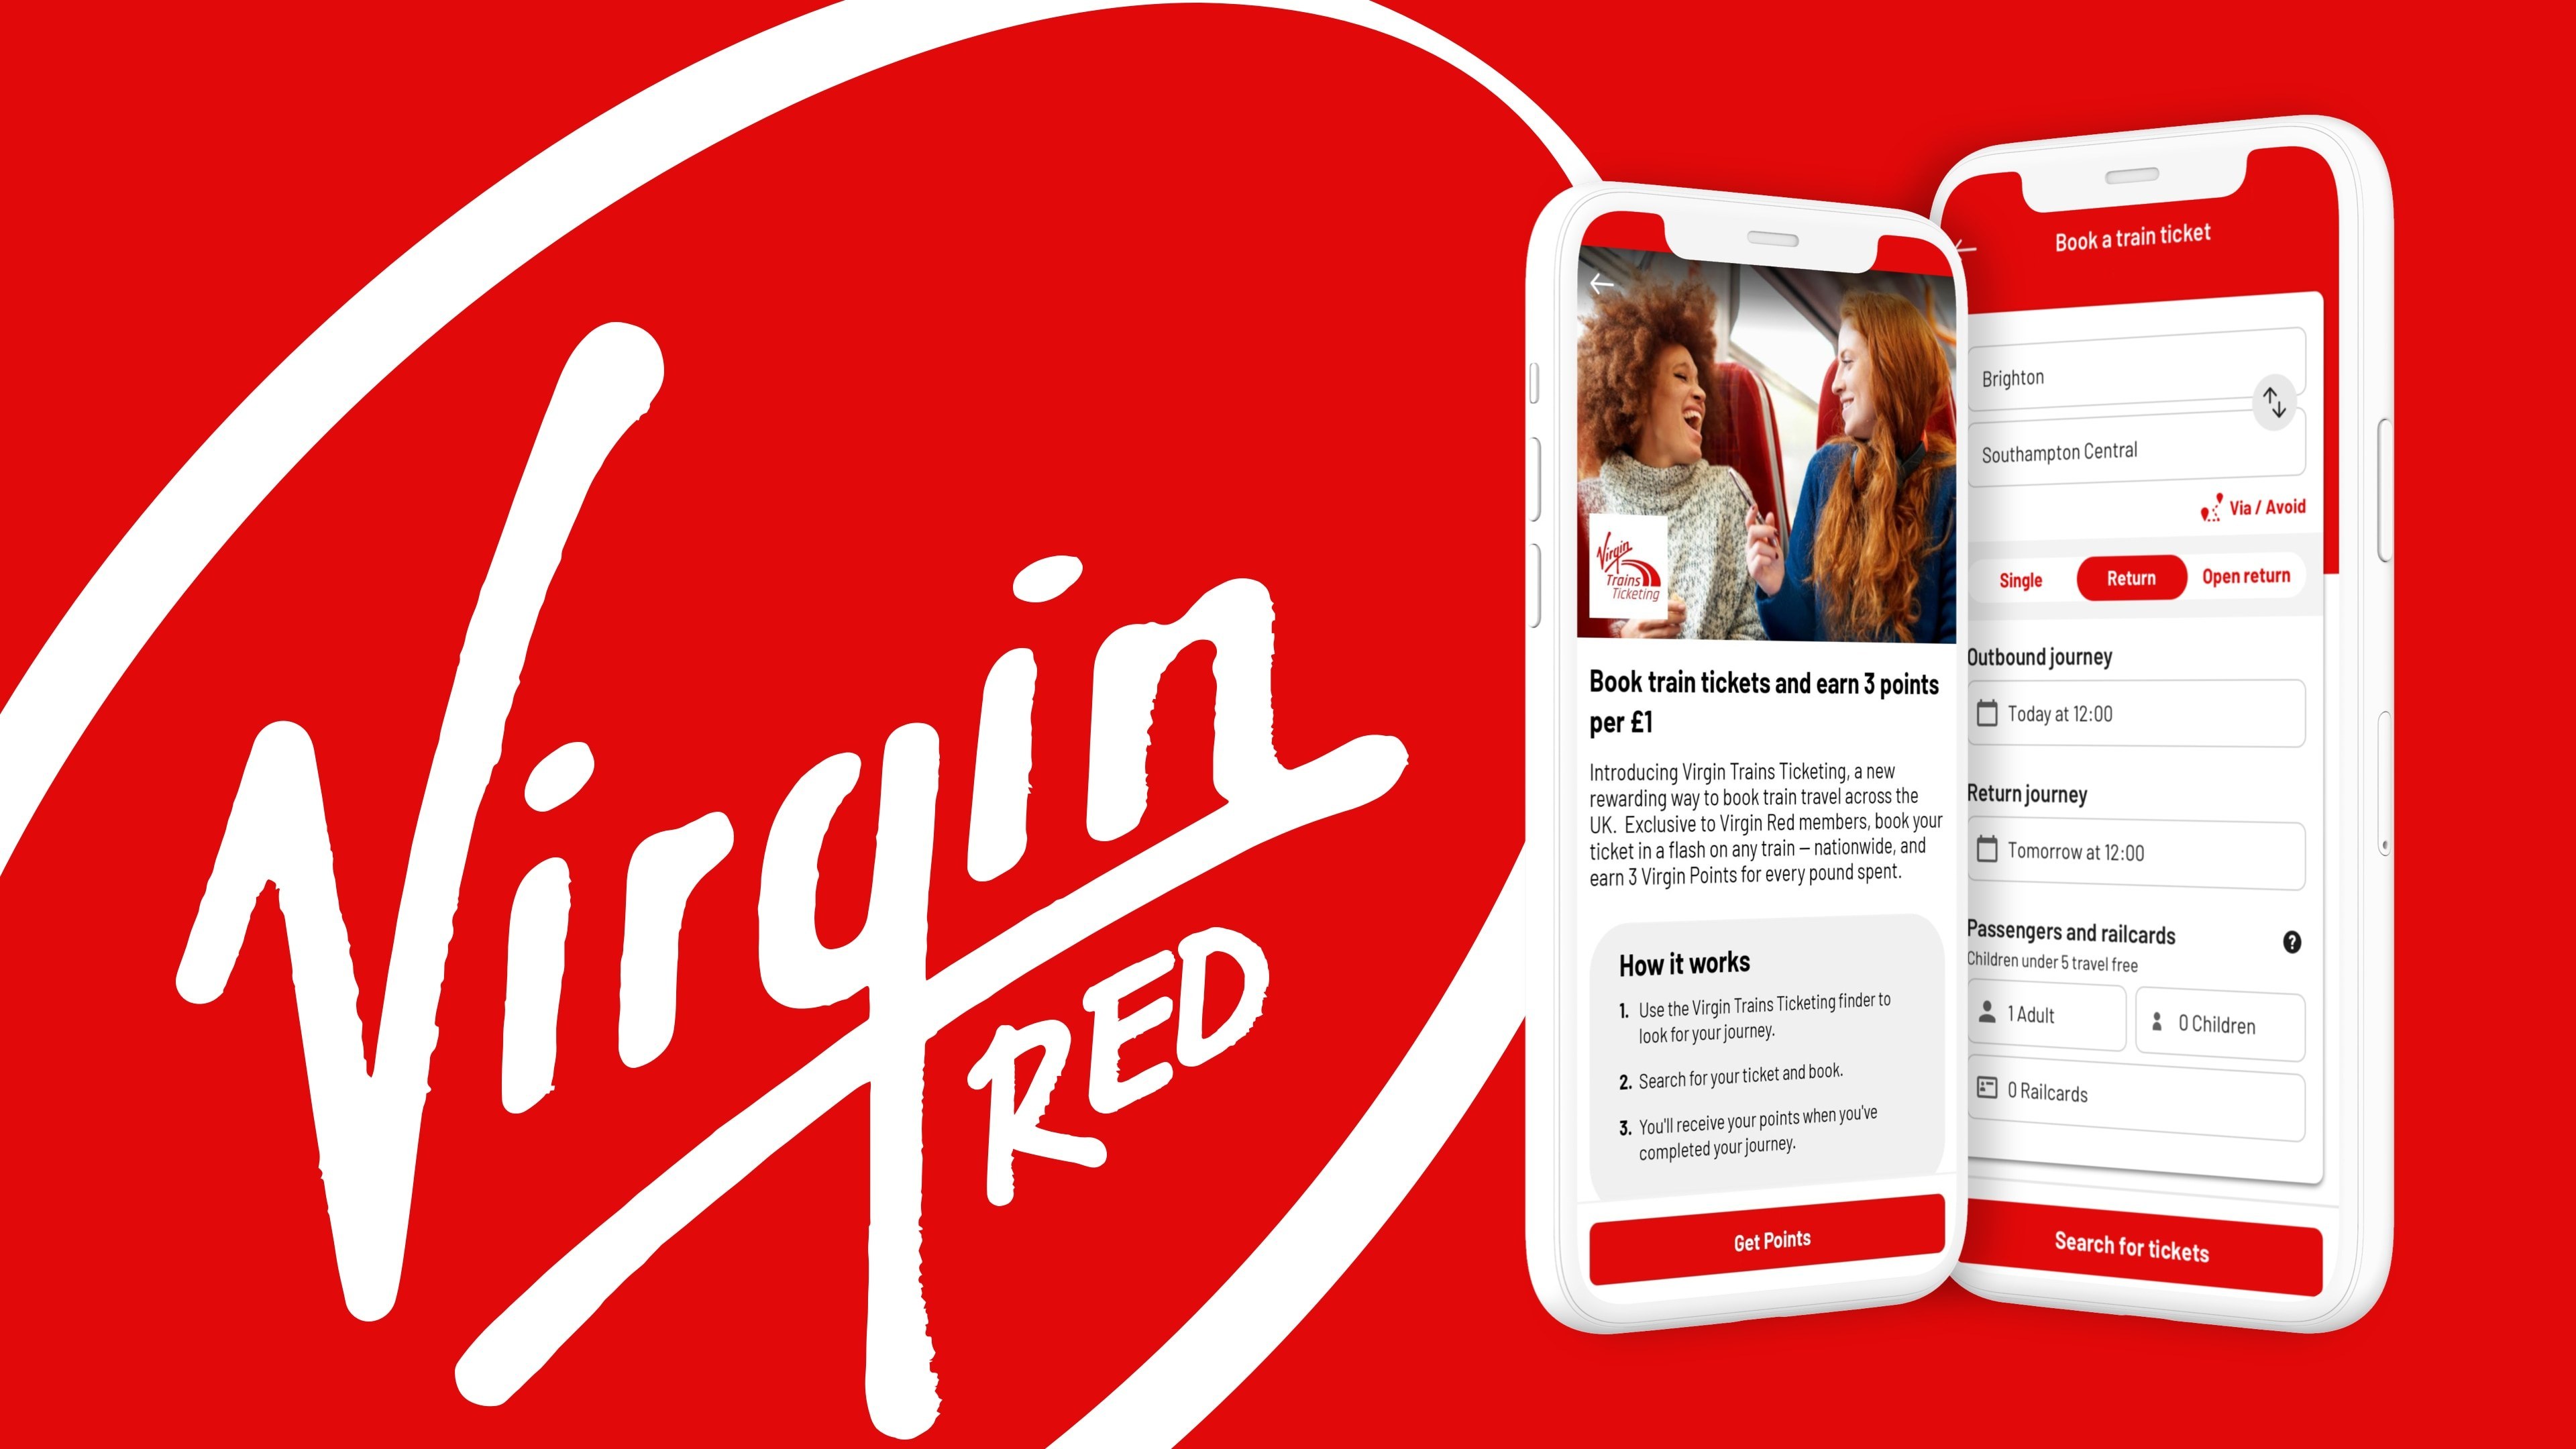 Virgin Red Listing Image showing logo and app screenshots